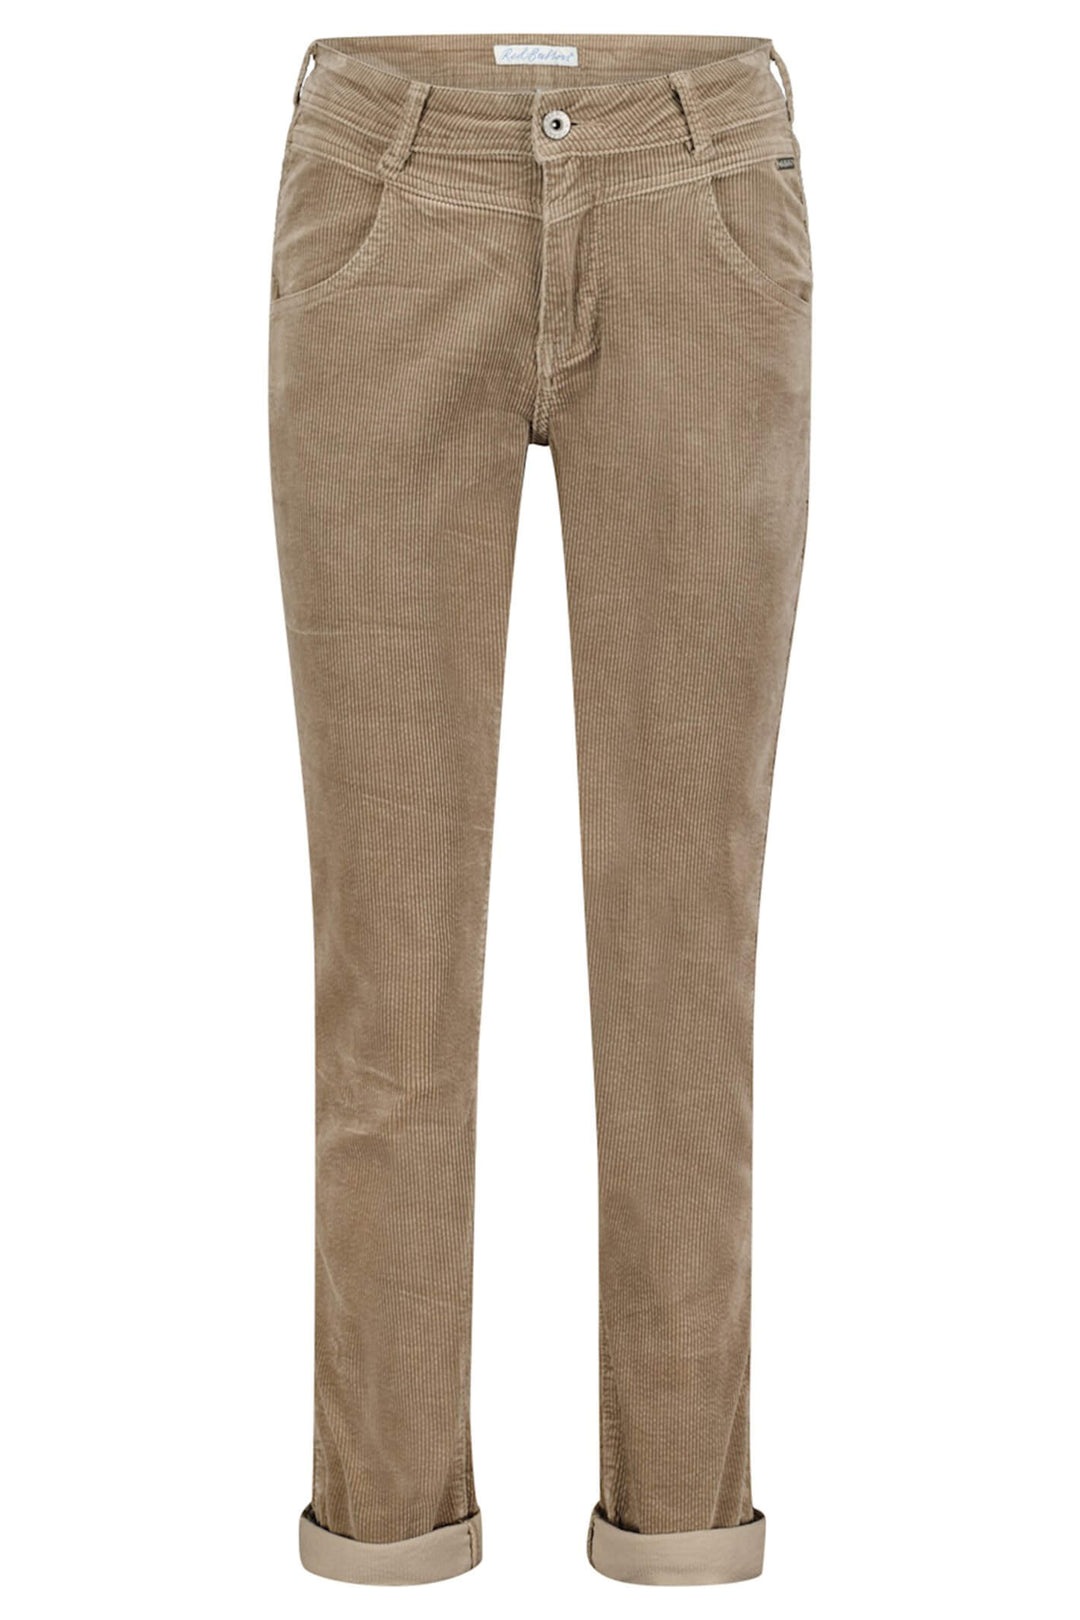 Red Button SRB4084 Sienna Taupe Corduroy Trousers